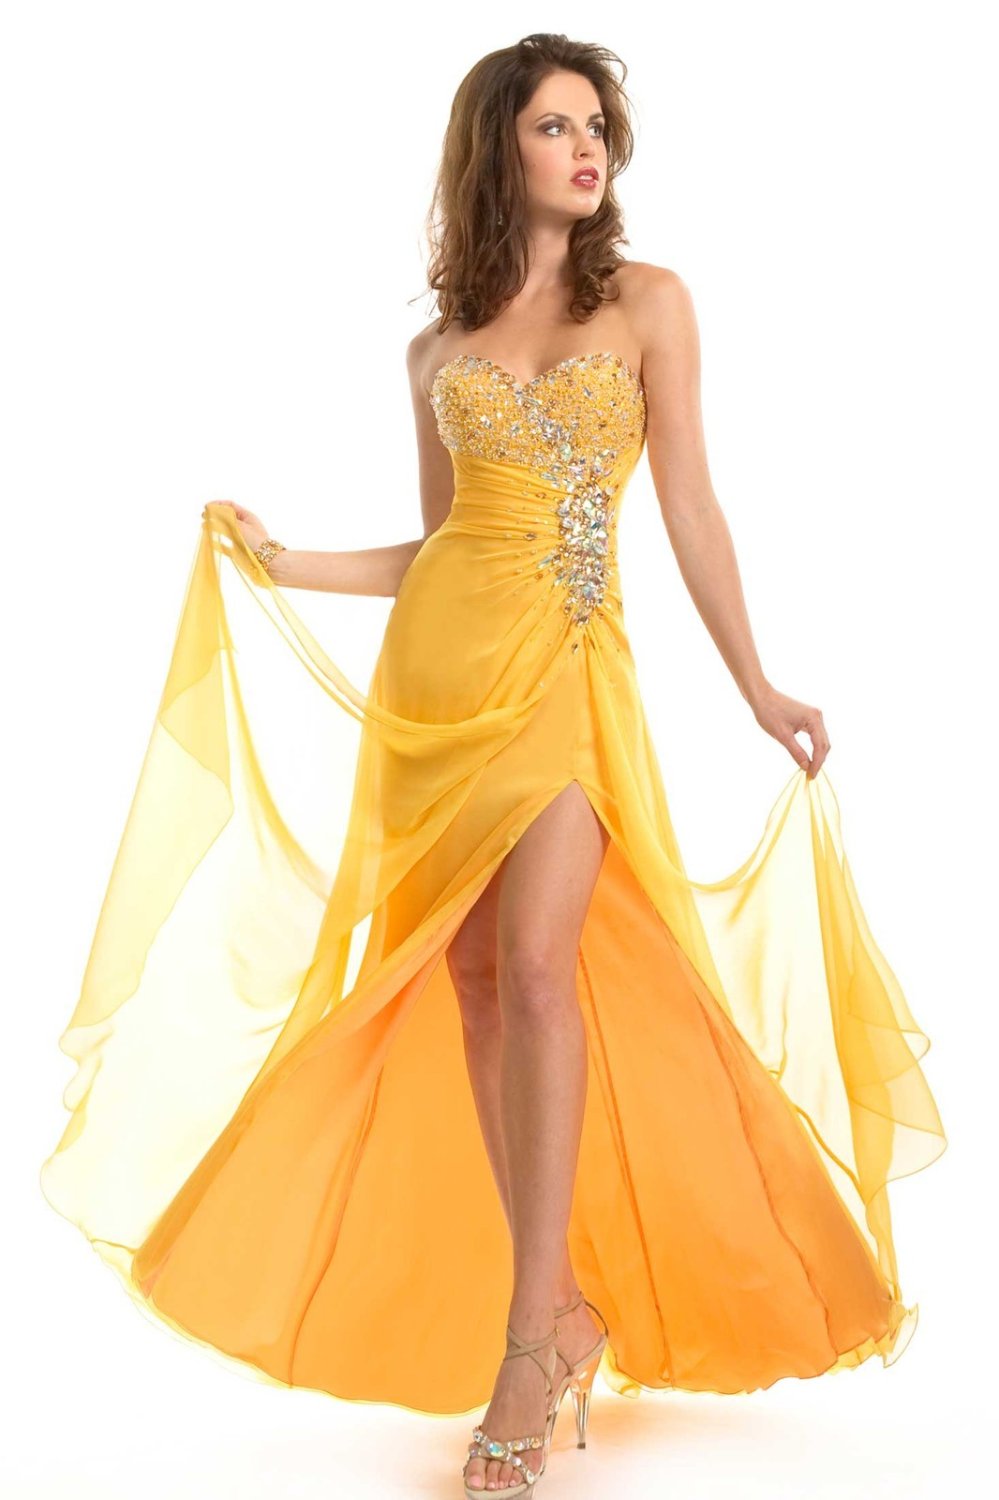 ... Chiffon-Yellow-Pageant-Gowns-Wedding-Formal-Evening-Prom-Bridal-Dress